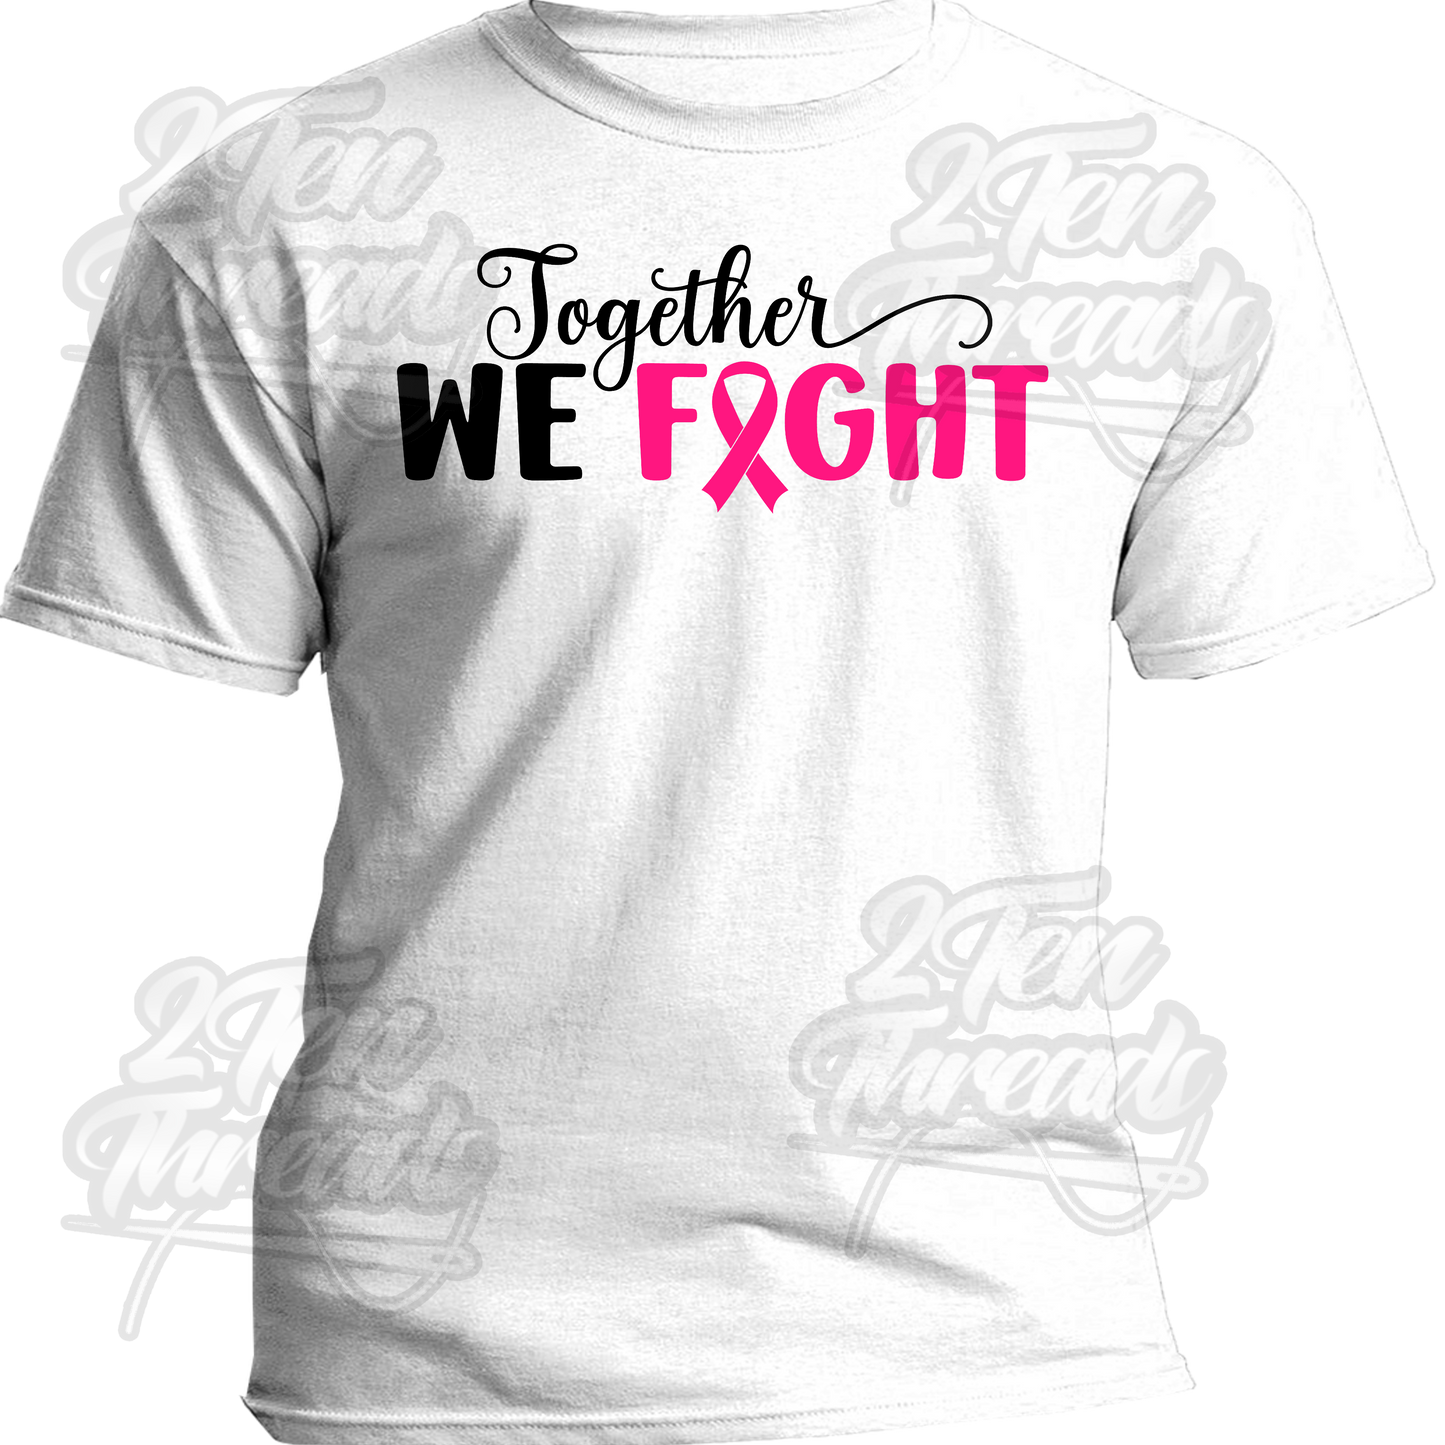 Together we fight shirt